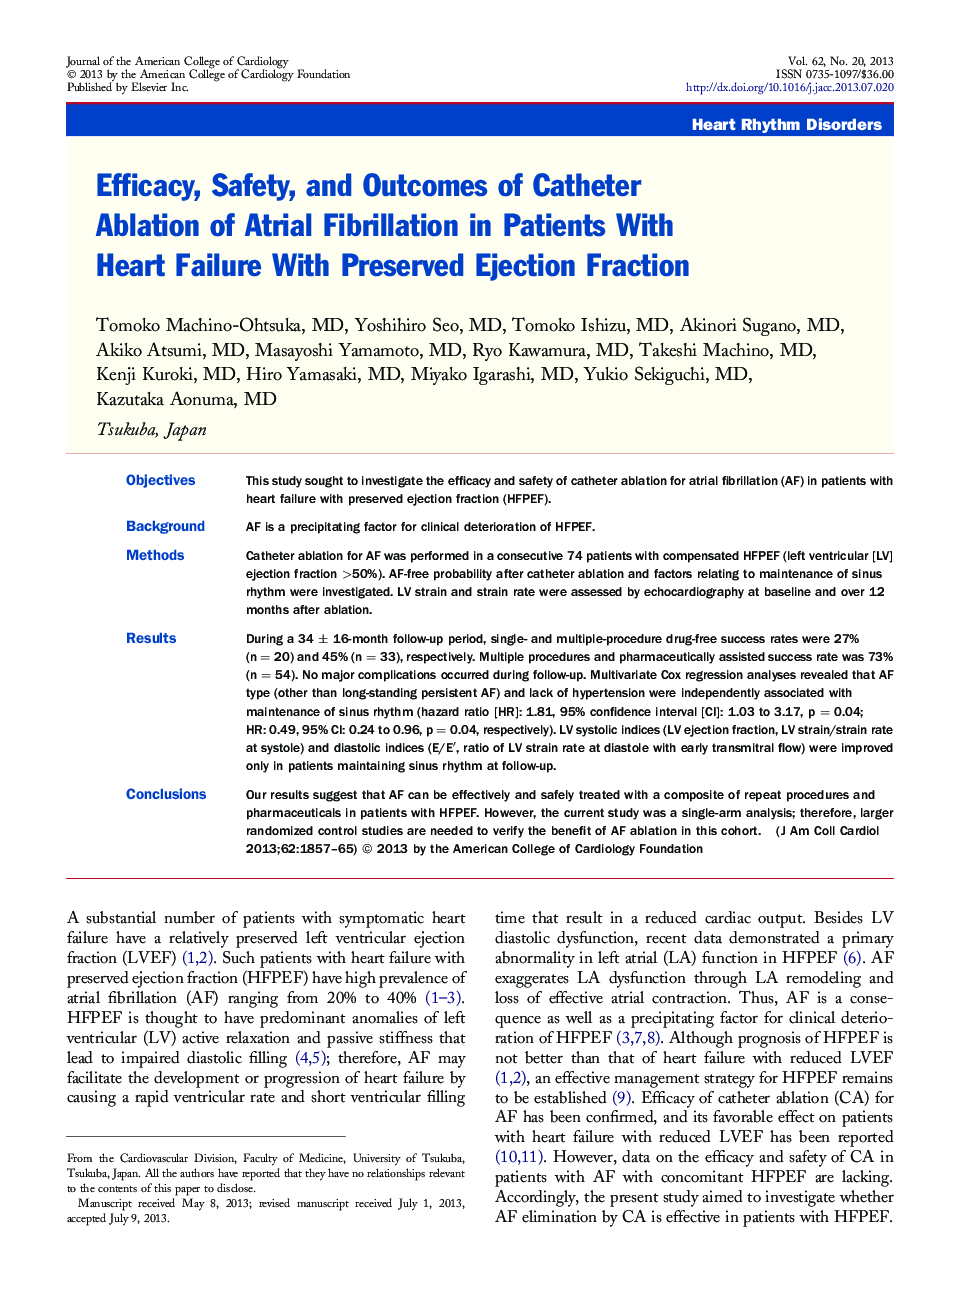 Efficacy, Safety, and Outcomes of Catheter Ablation of Atrial Fibrillation in Patients With Heart Failure With Preserved Ejection Fraction 